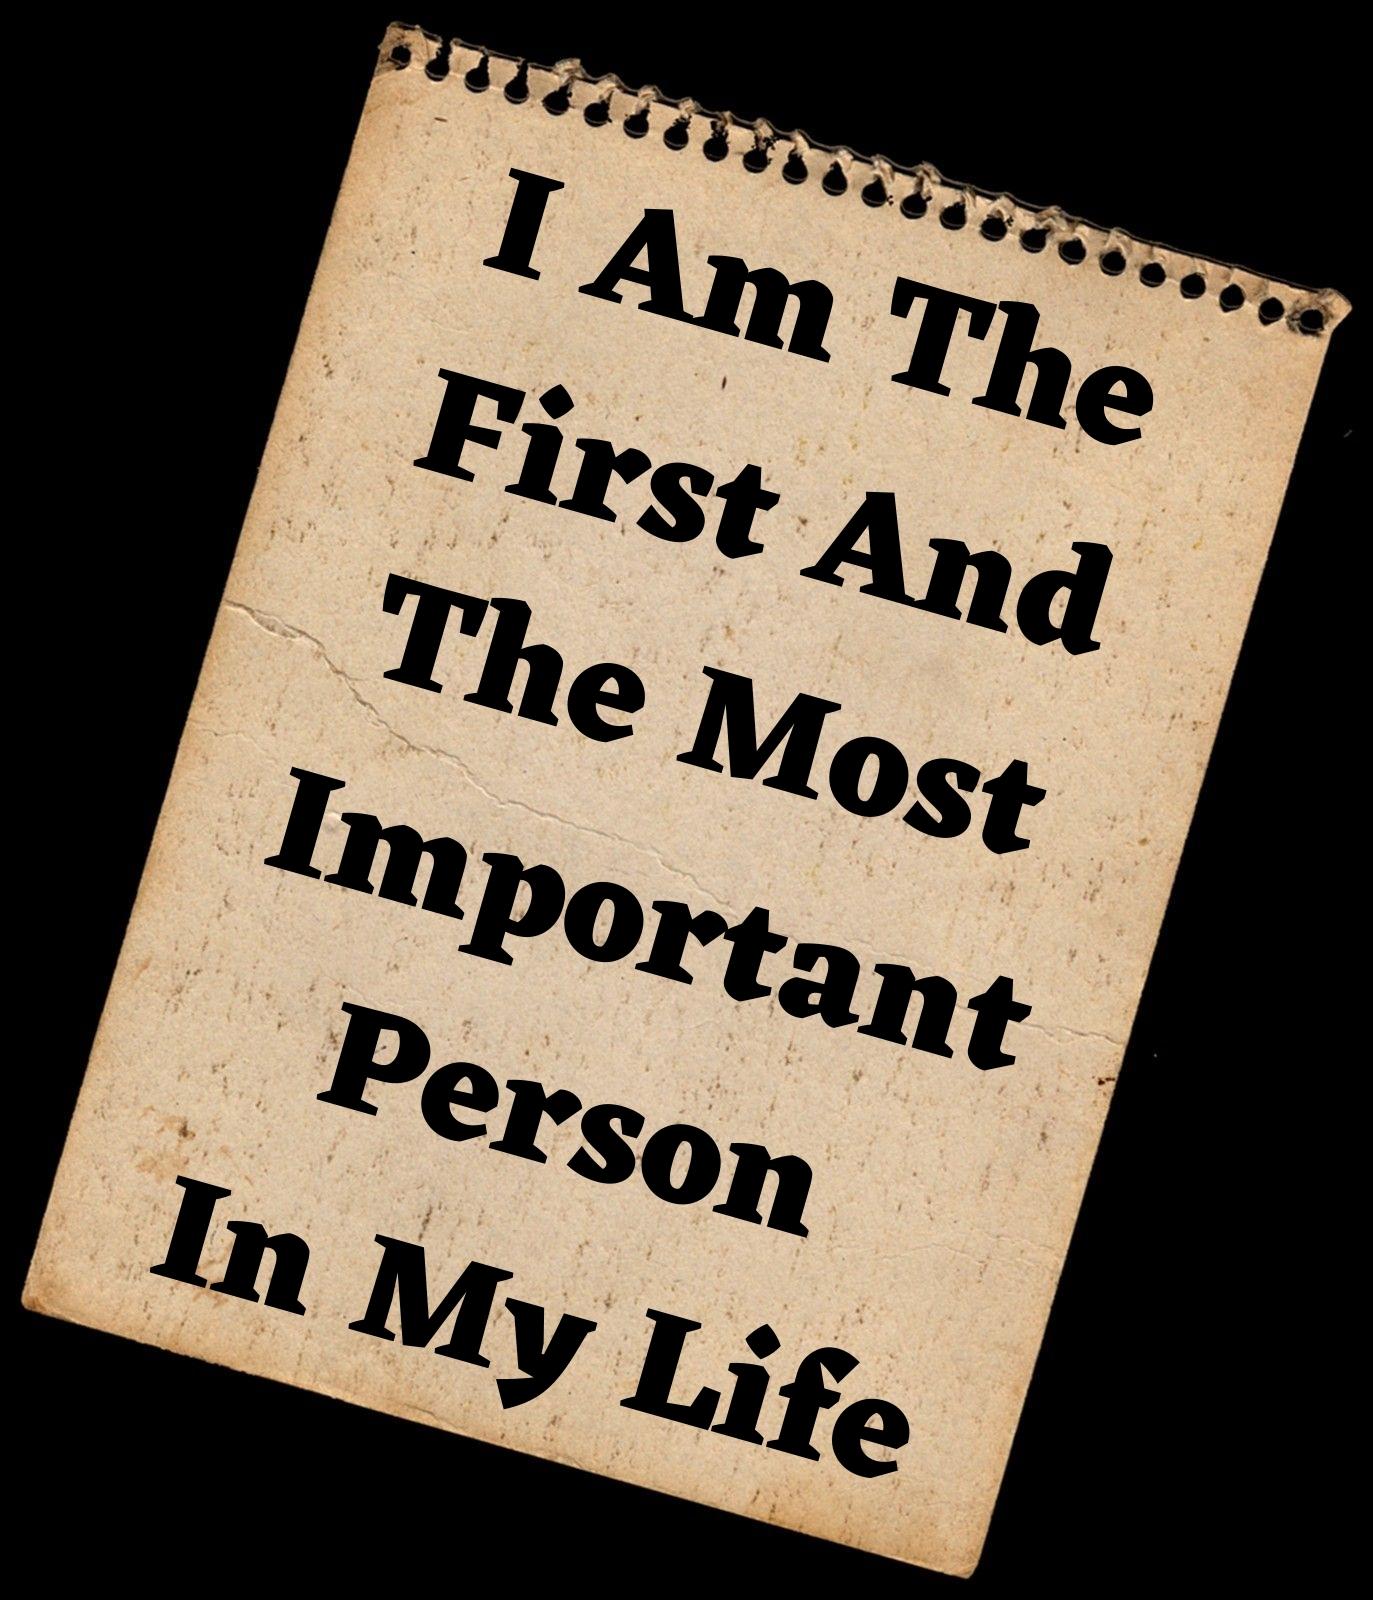  I am the first and the most important person in my life.